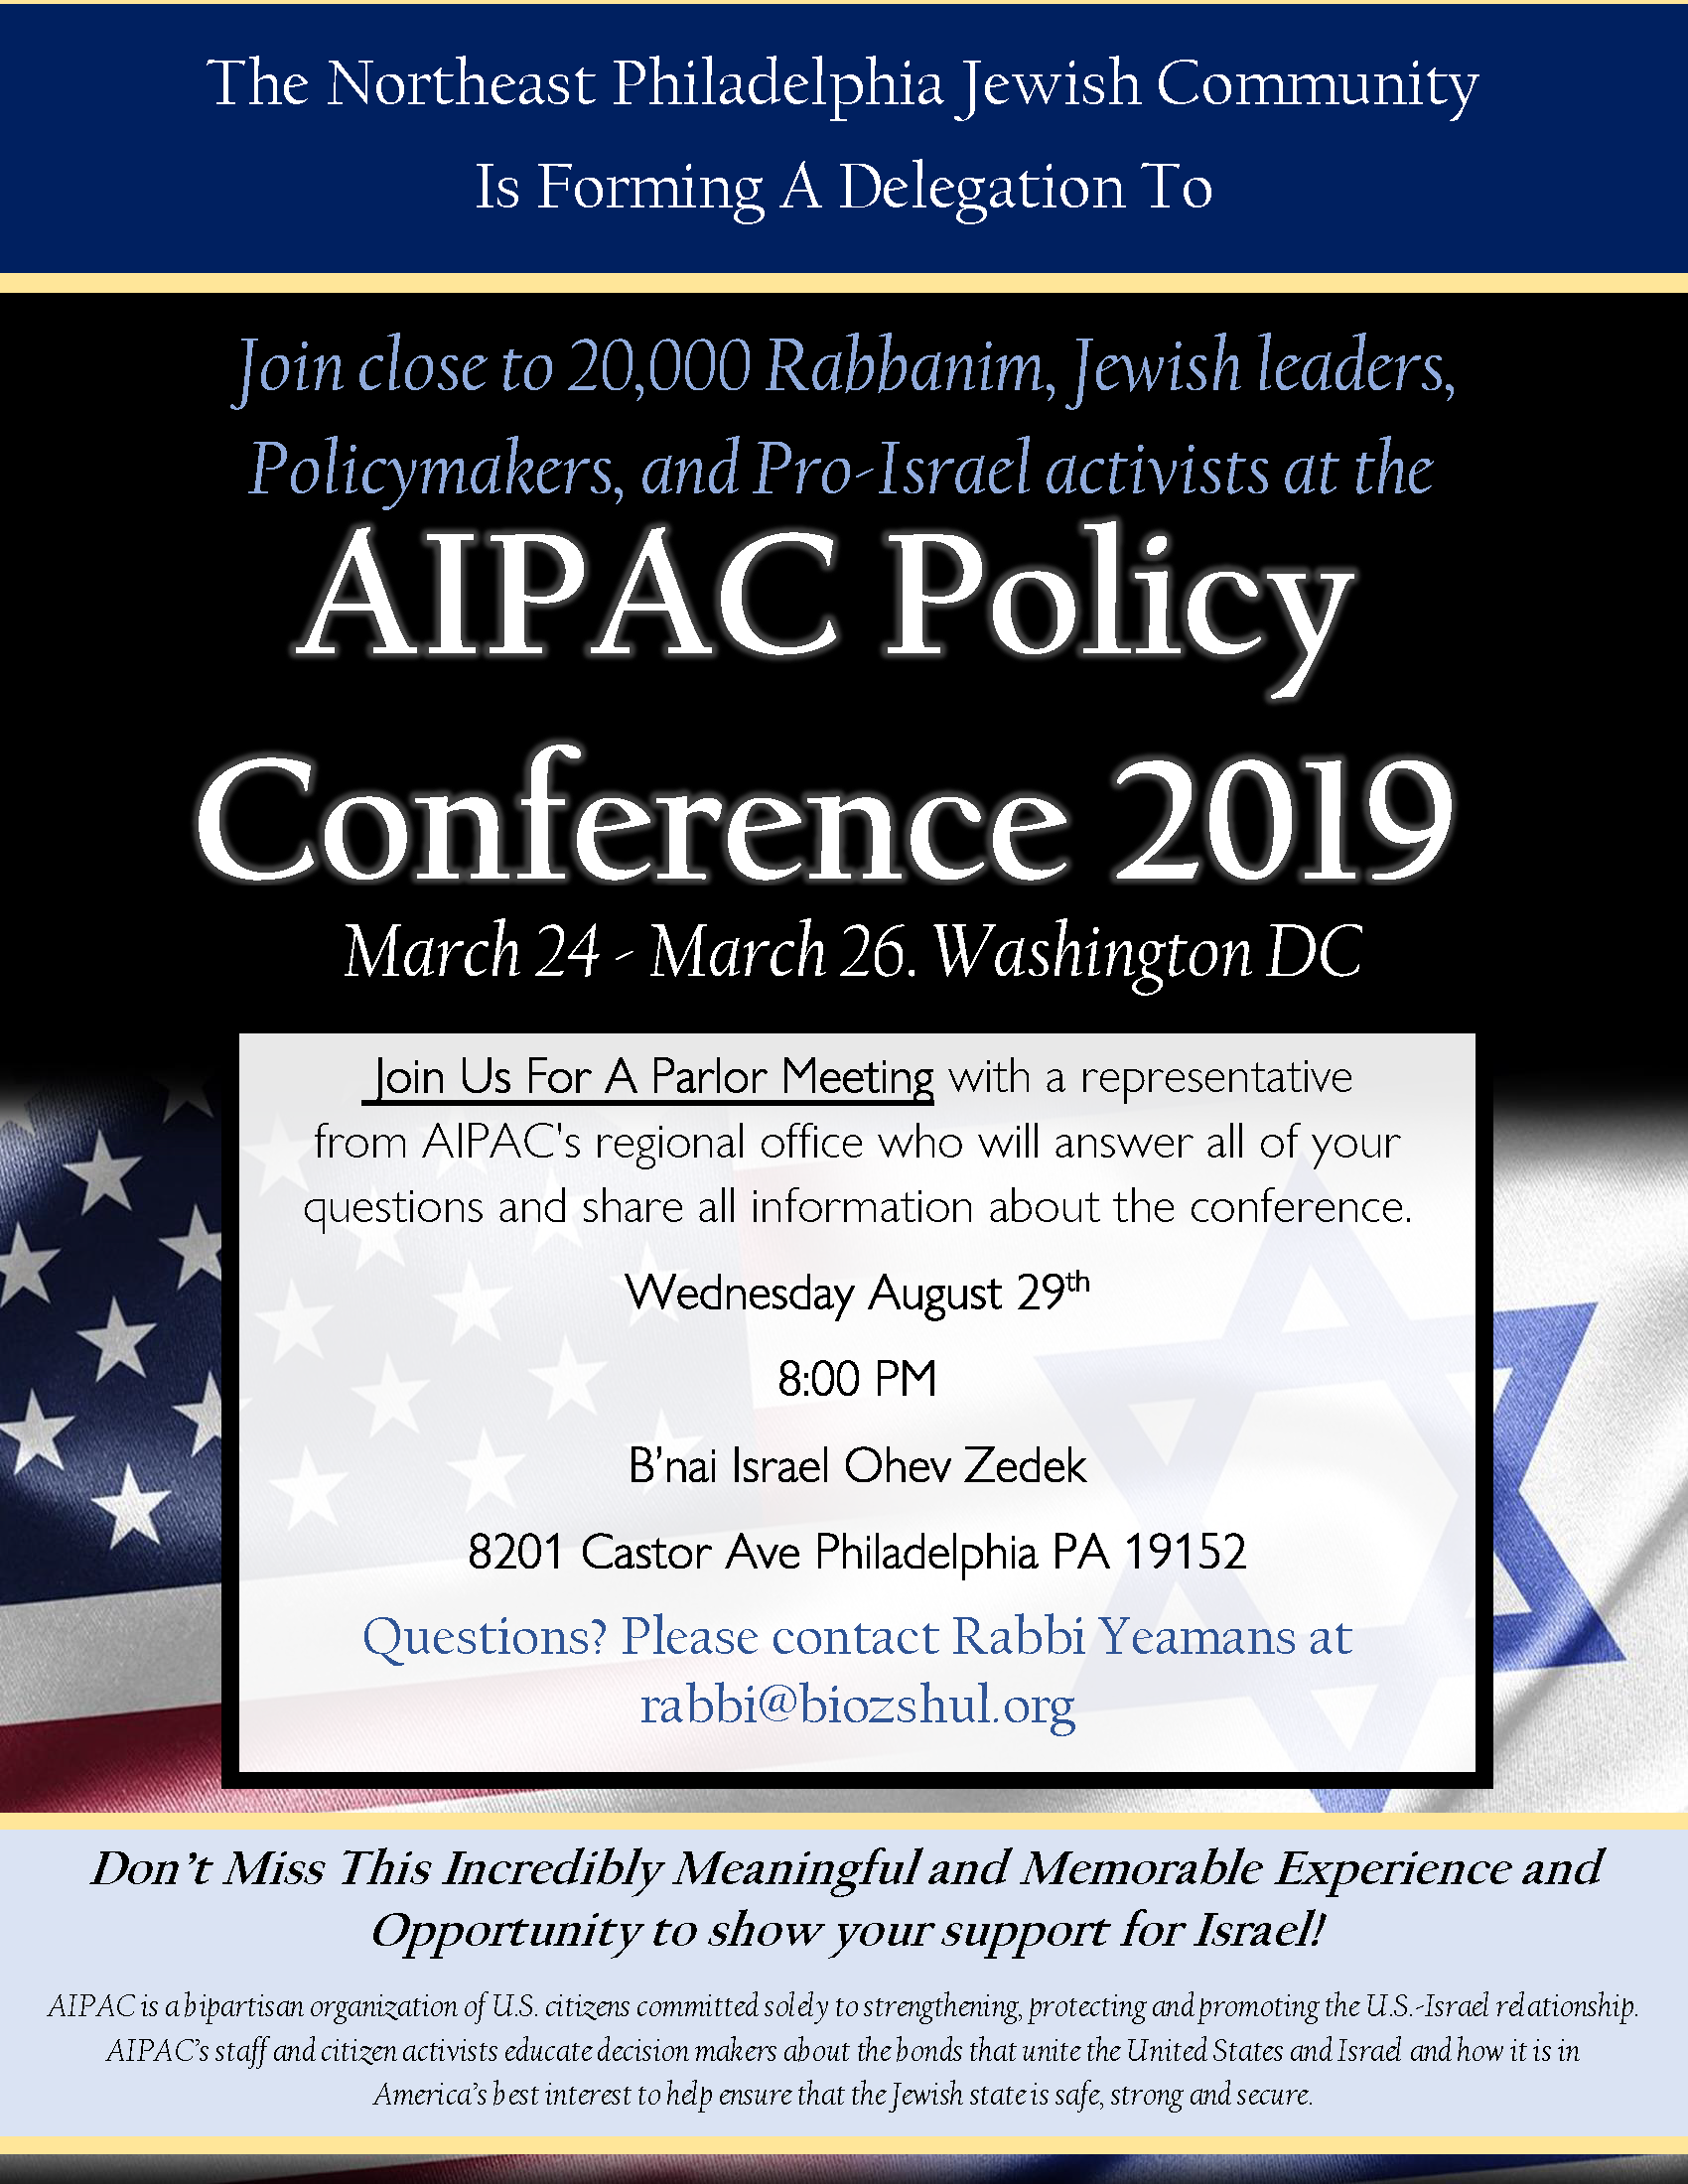 AIPAC Policy Conference 2019